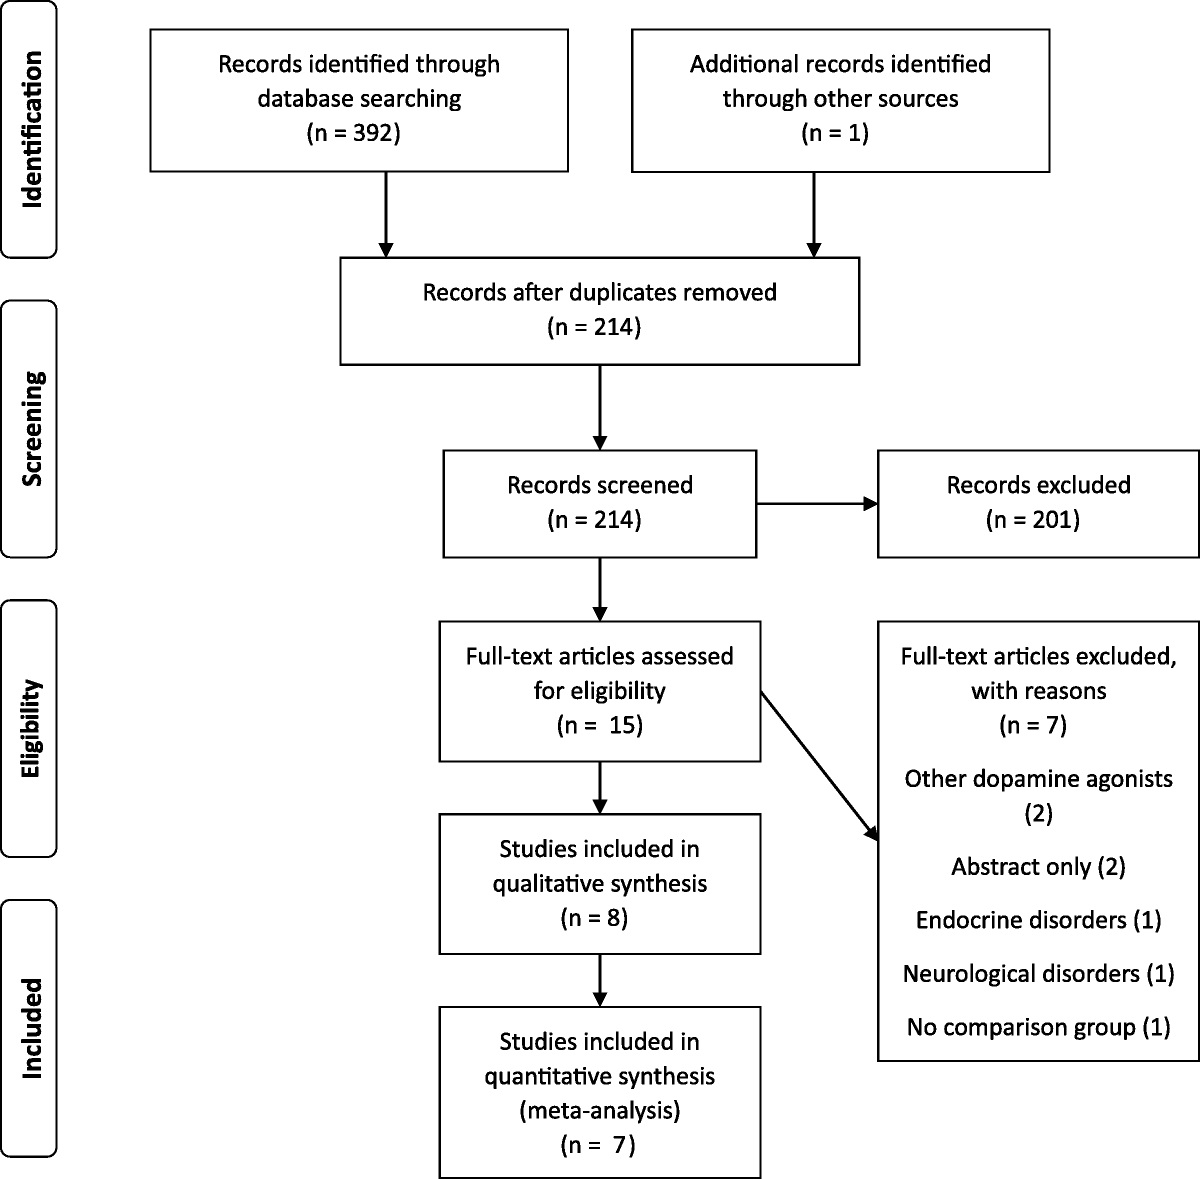 Aripiprazole and Other Third-Generation Antipsychotics as a Risk Factor for Impulse Control Disorders: A Systematic Review and Meta-Analysis